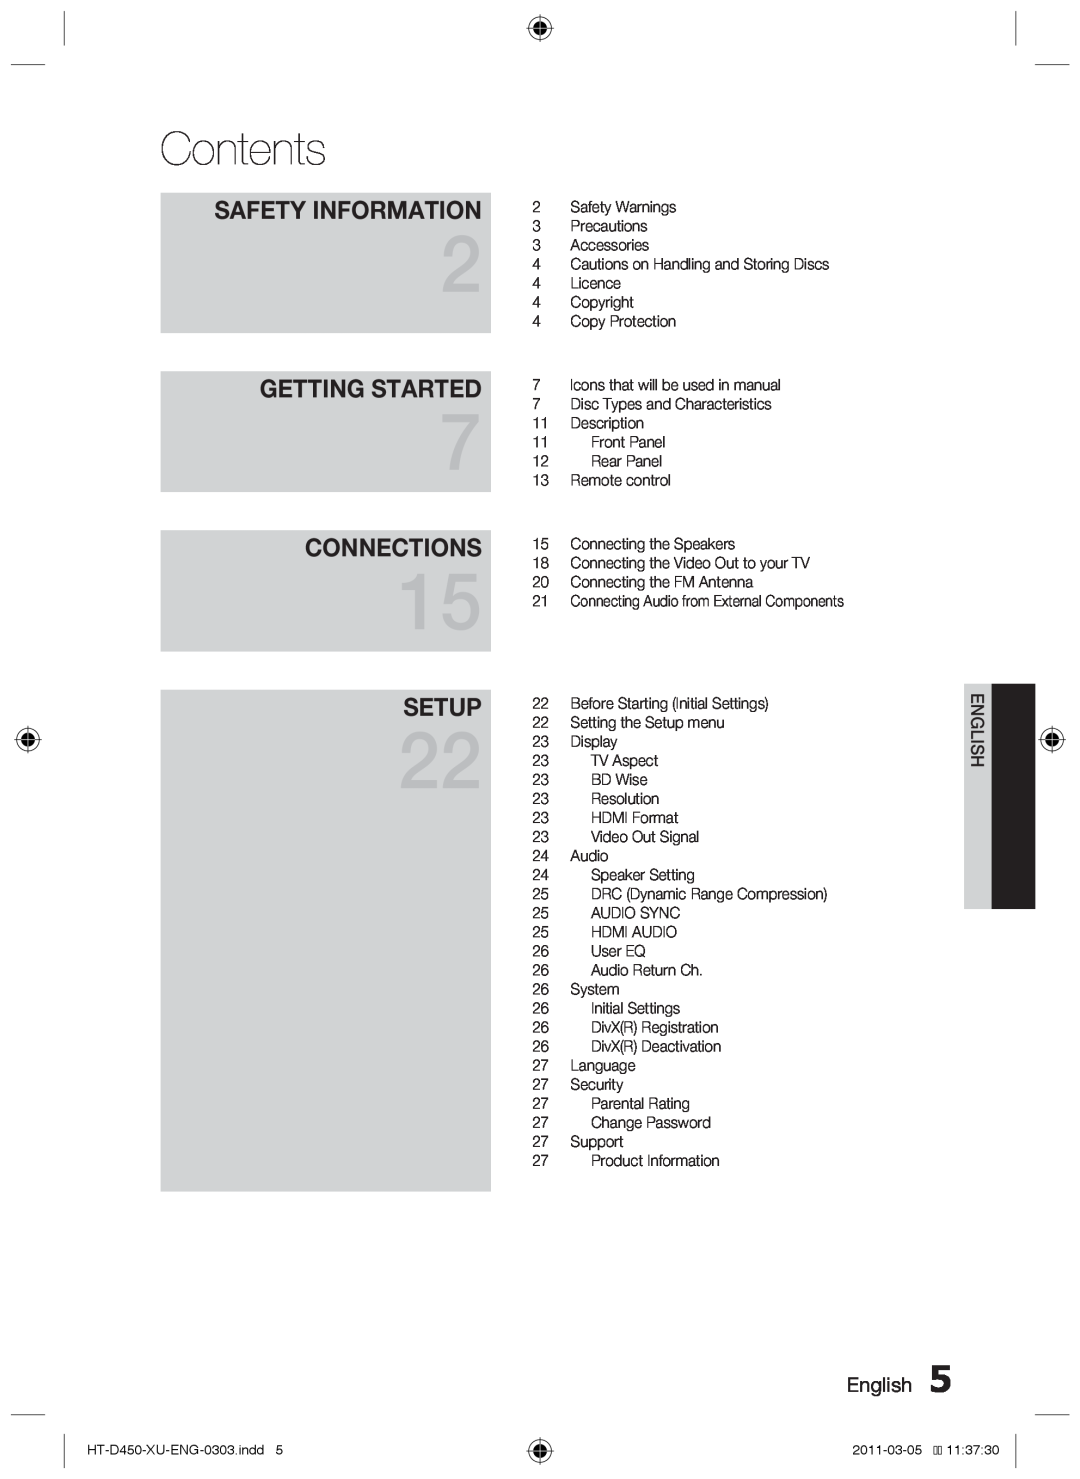 Samsung HT-D453, HT-D450, HT-D455 user manual Contents, Safety Information, Getting Started, Connections, Setup, English  